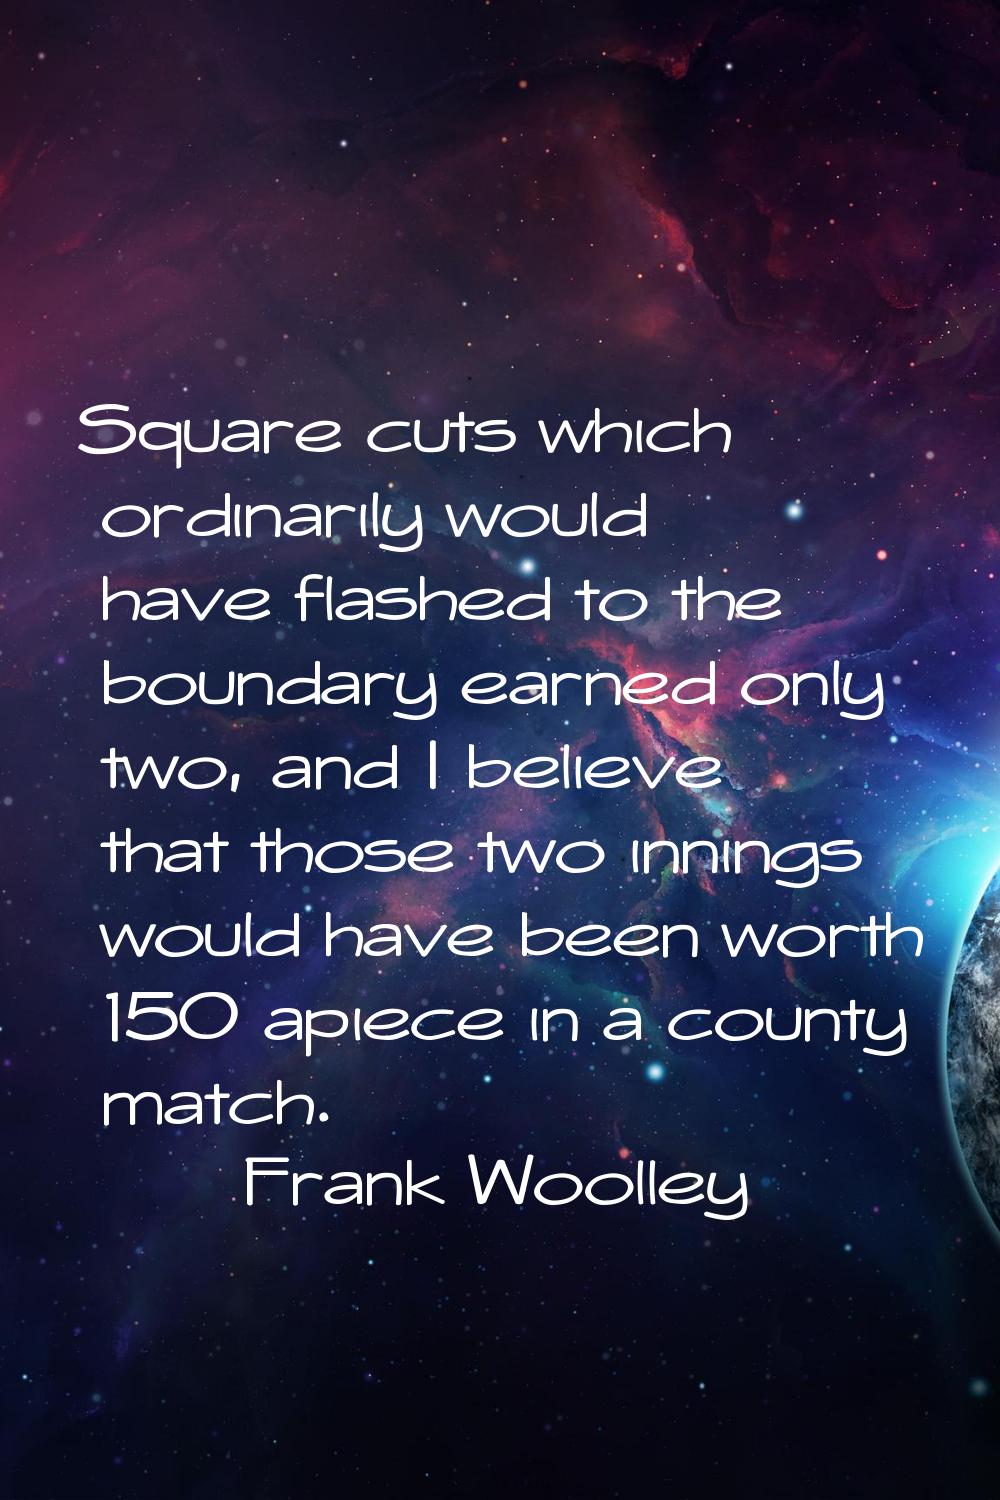 Square cuts which ordinarily would have flashed to the boundary earned only two, and I believe that